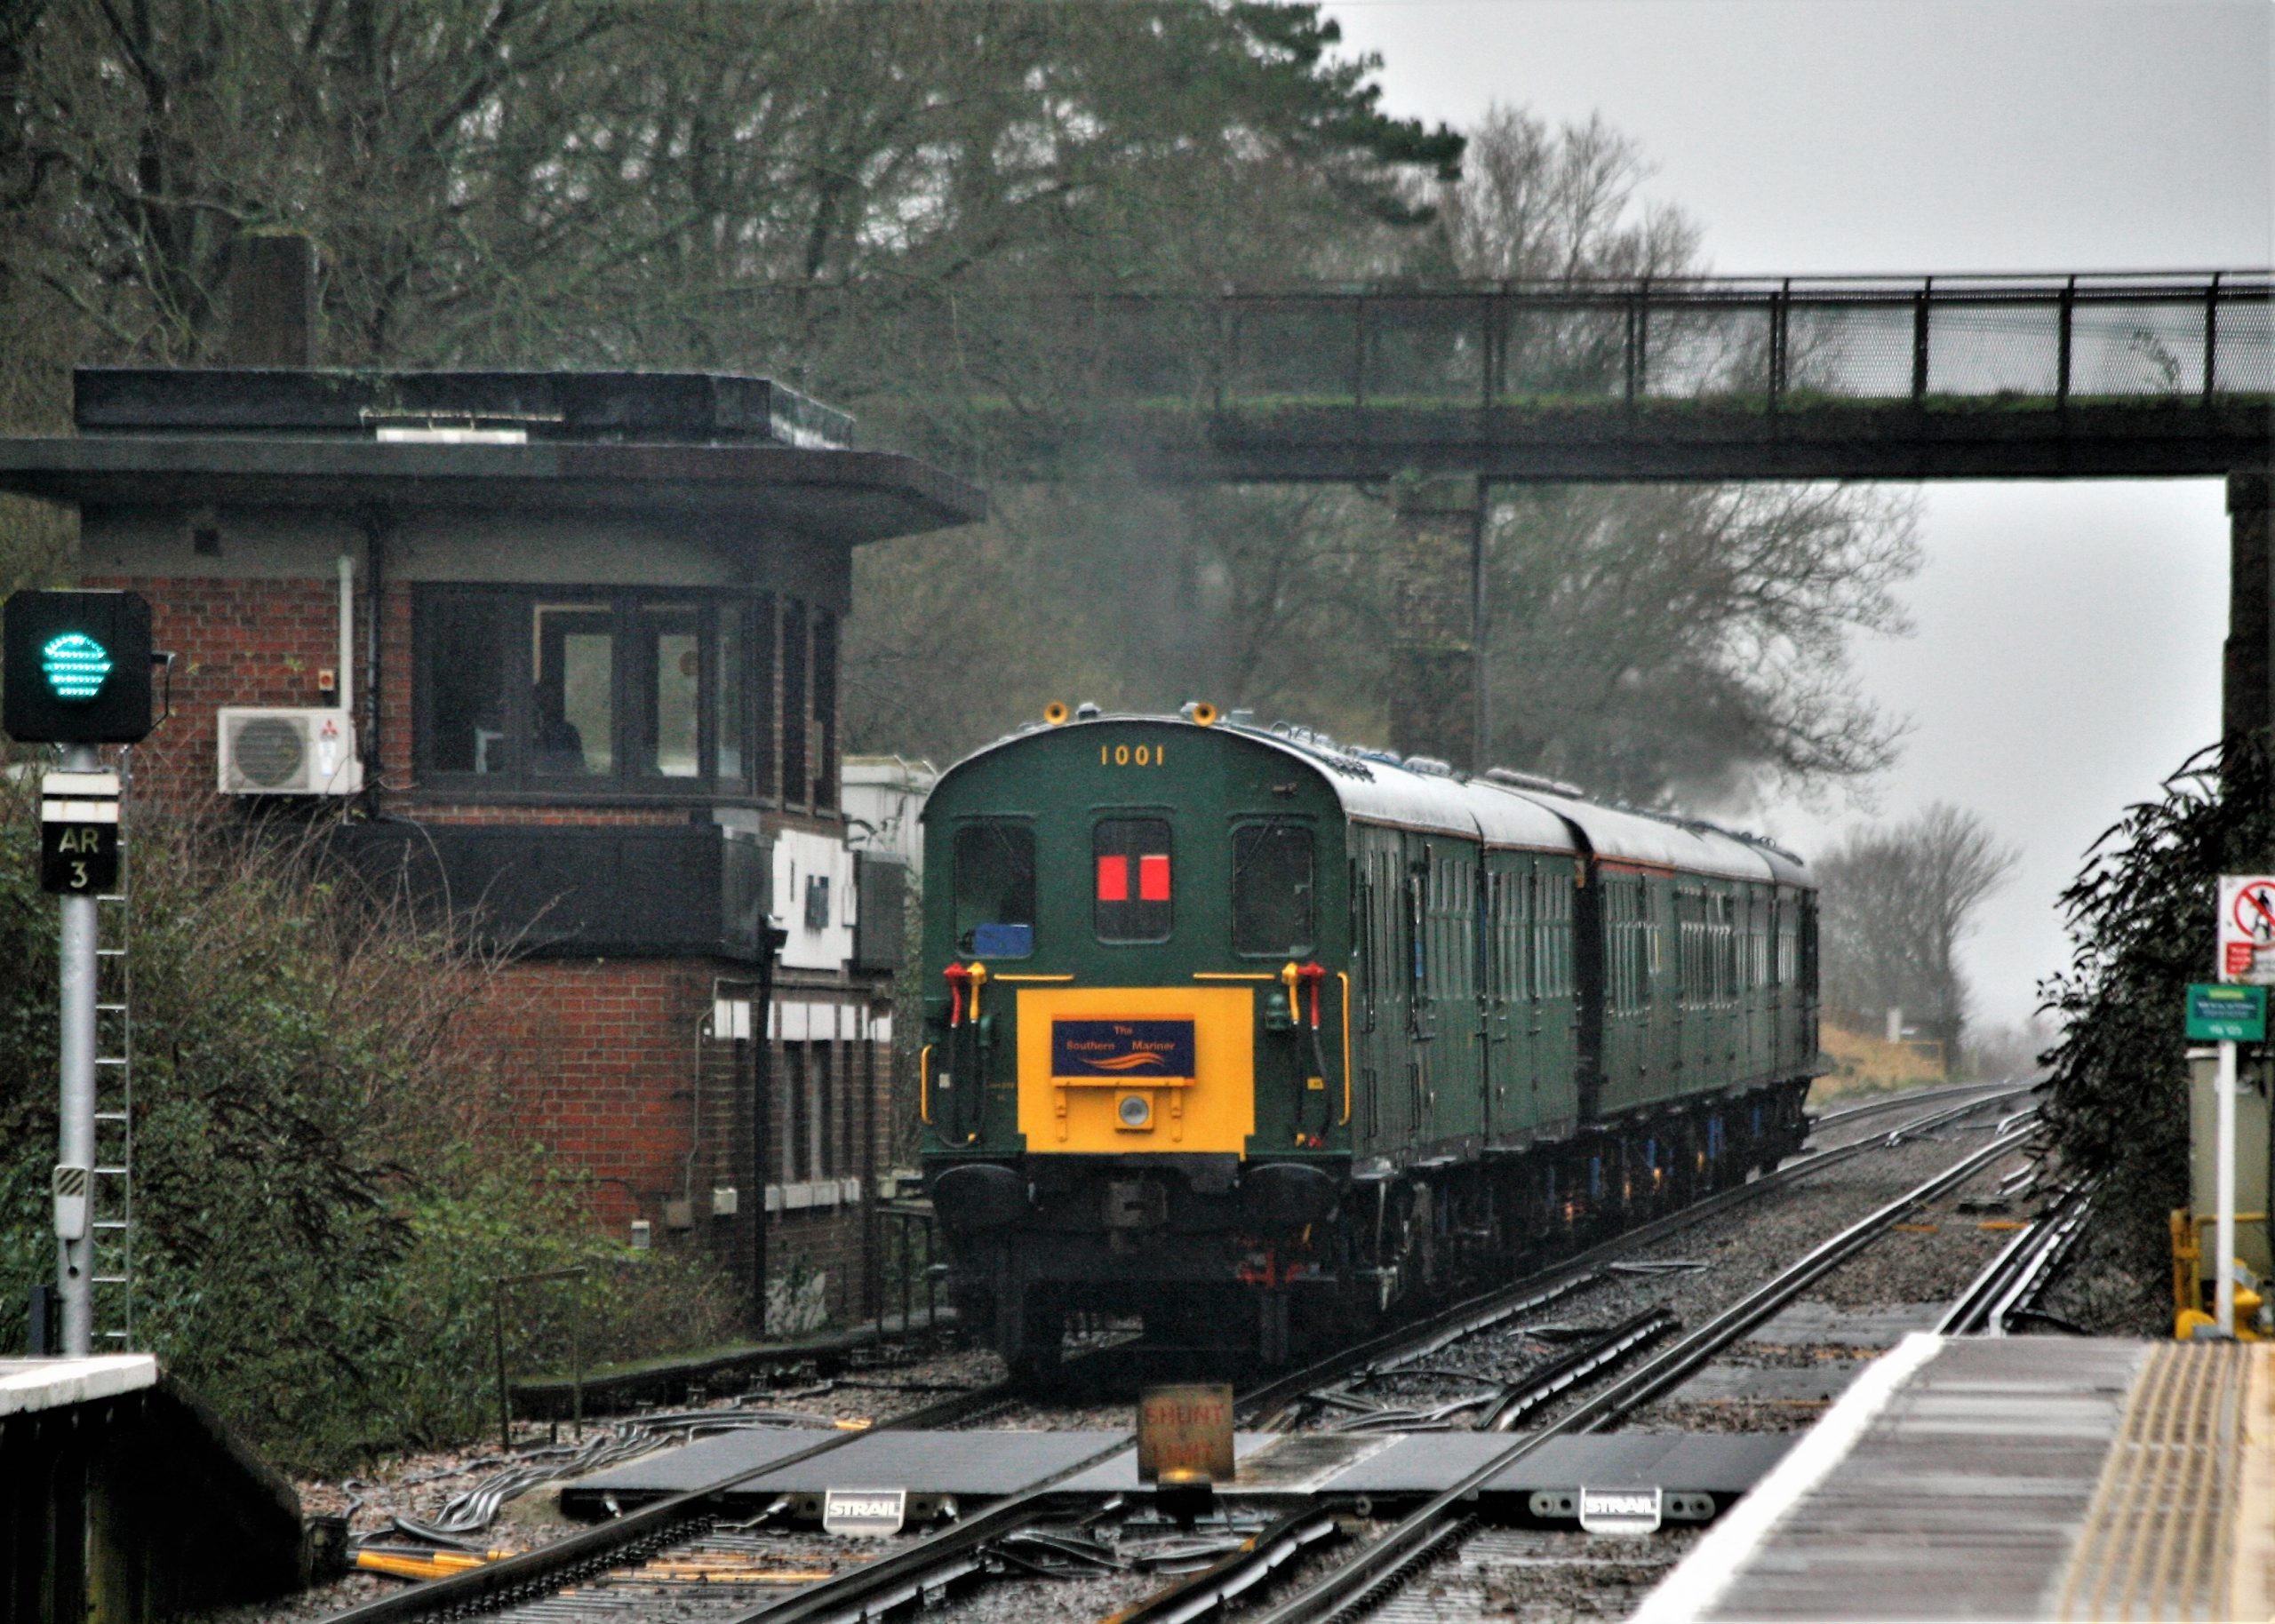 Hastings Diesel Ltd Hastings-Portsmouth Harbour 'Southern Mariner'  ran in foul weather, but offered opportunities to photograph the Hastings unit with some of the West Coastway area's signalboxes.
Power car 'Tunbridge Wells' brings up the rear, as the tour passes Arundel's 'Odeon' box at 10:41 Saturday 08 January 2022.  Image Credit:  Julian Clark

